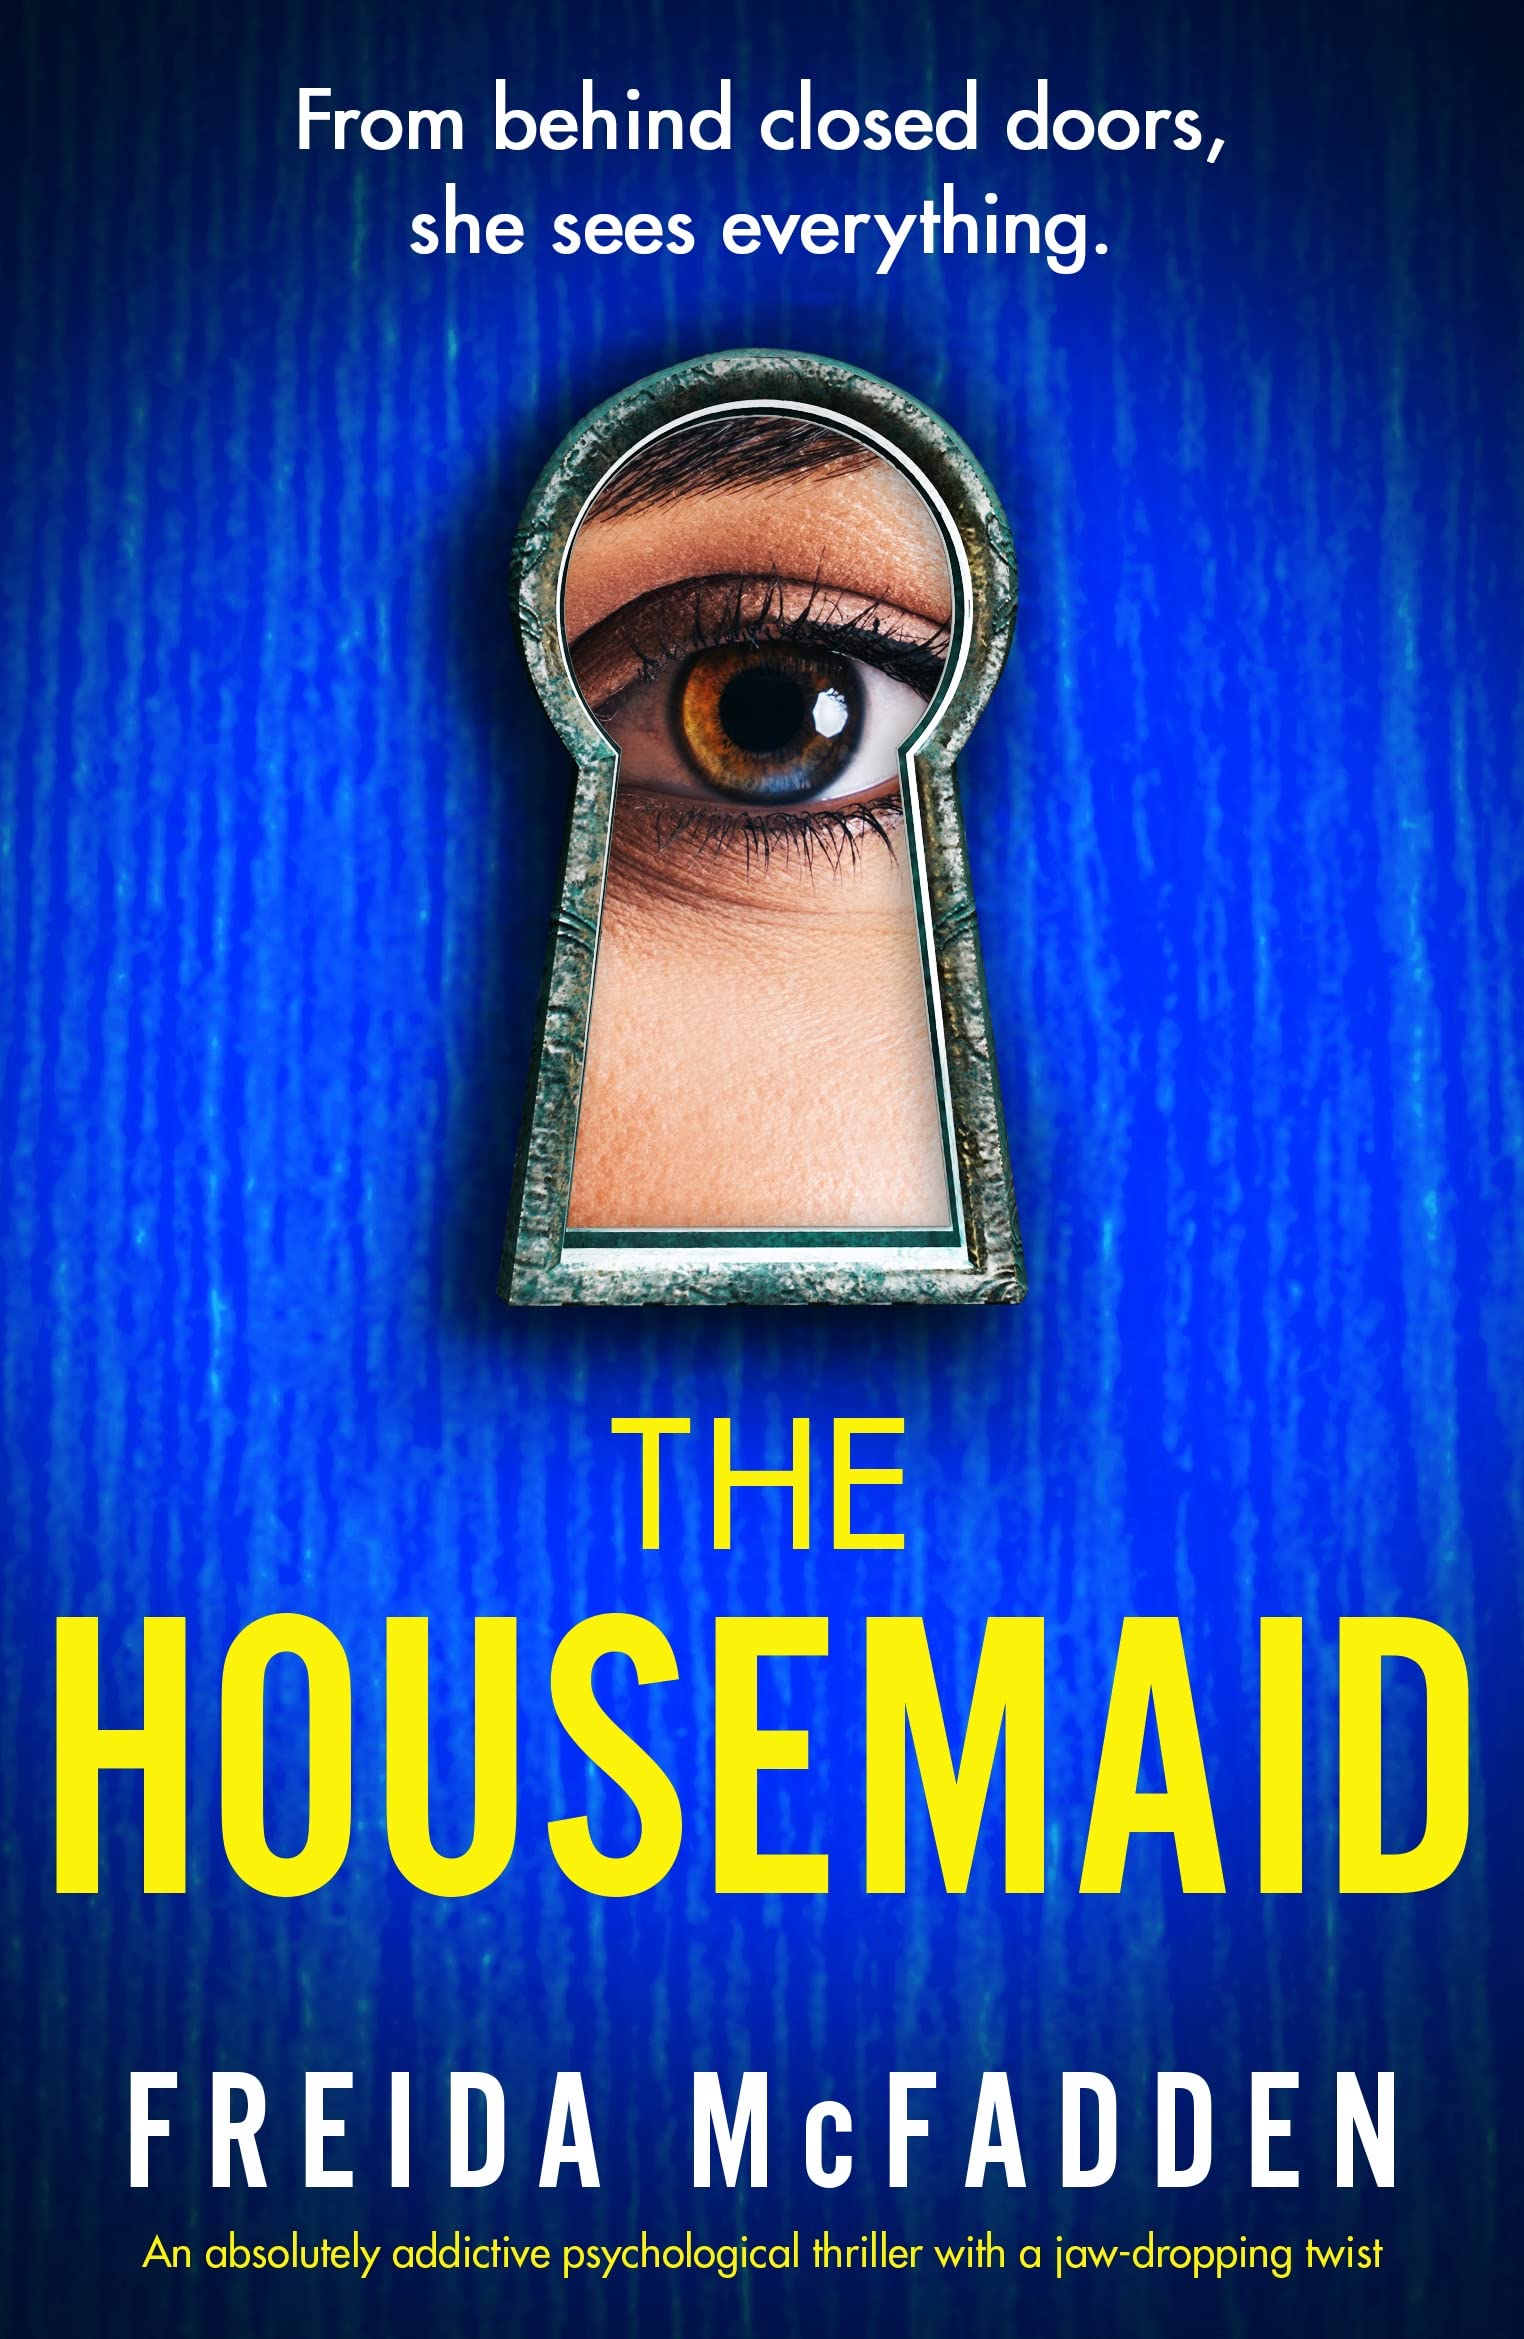 the housemaid by freida mcfadden book review